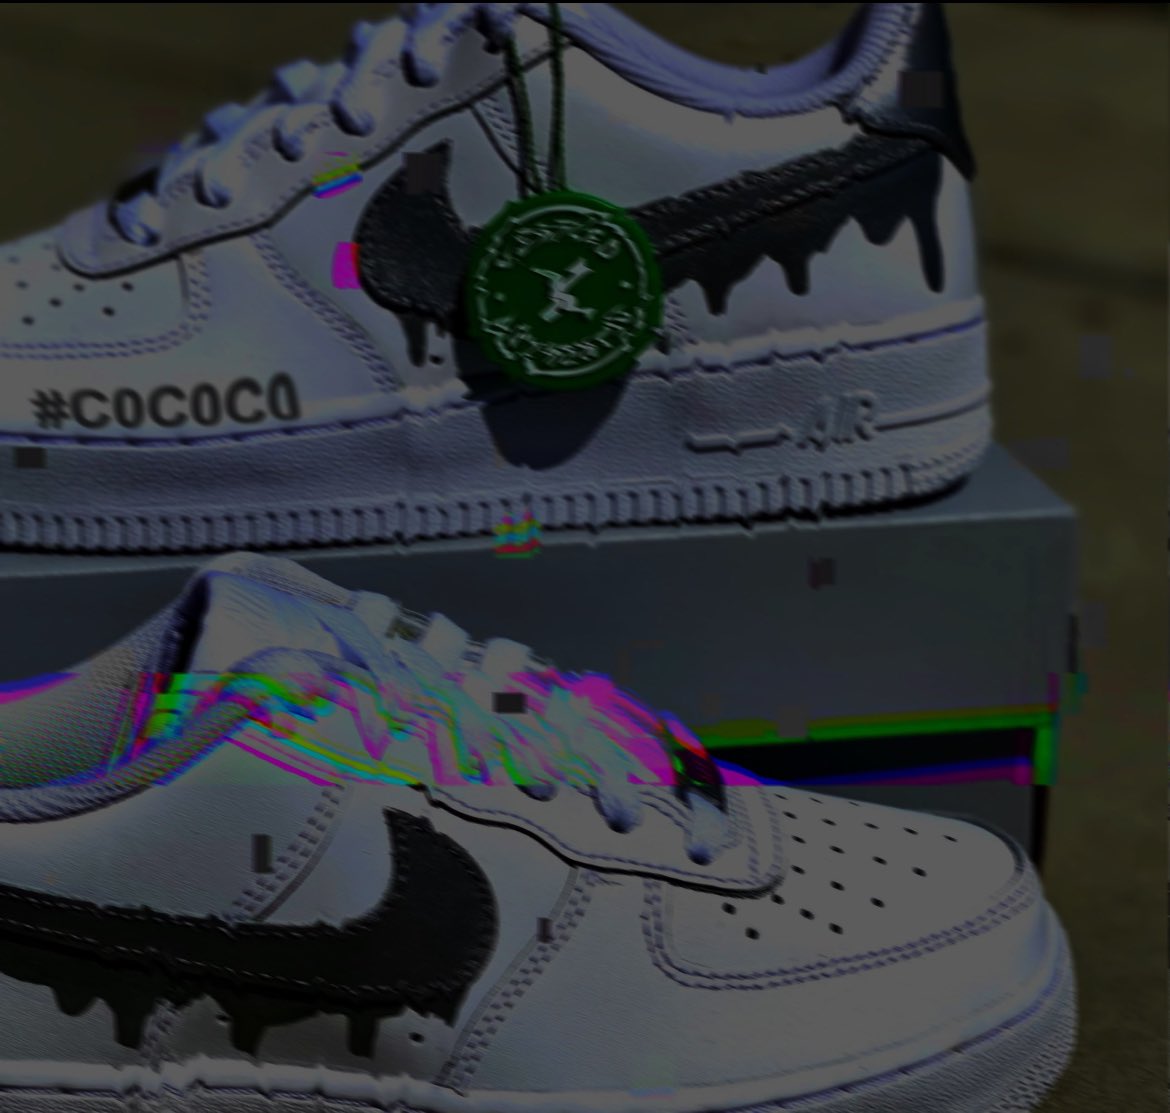 🚨🥵🥵🥵🥵🚨

#COCOCO 
#AF1
#CustomKicks 

And lots more
Come Join the #Engagement 🤟🏿

discord.gg/weseesilver